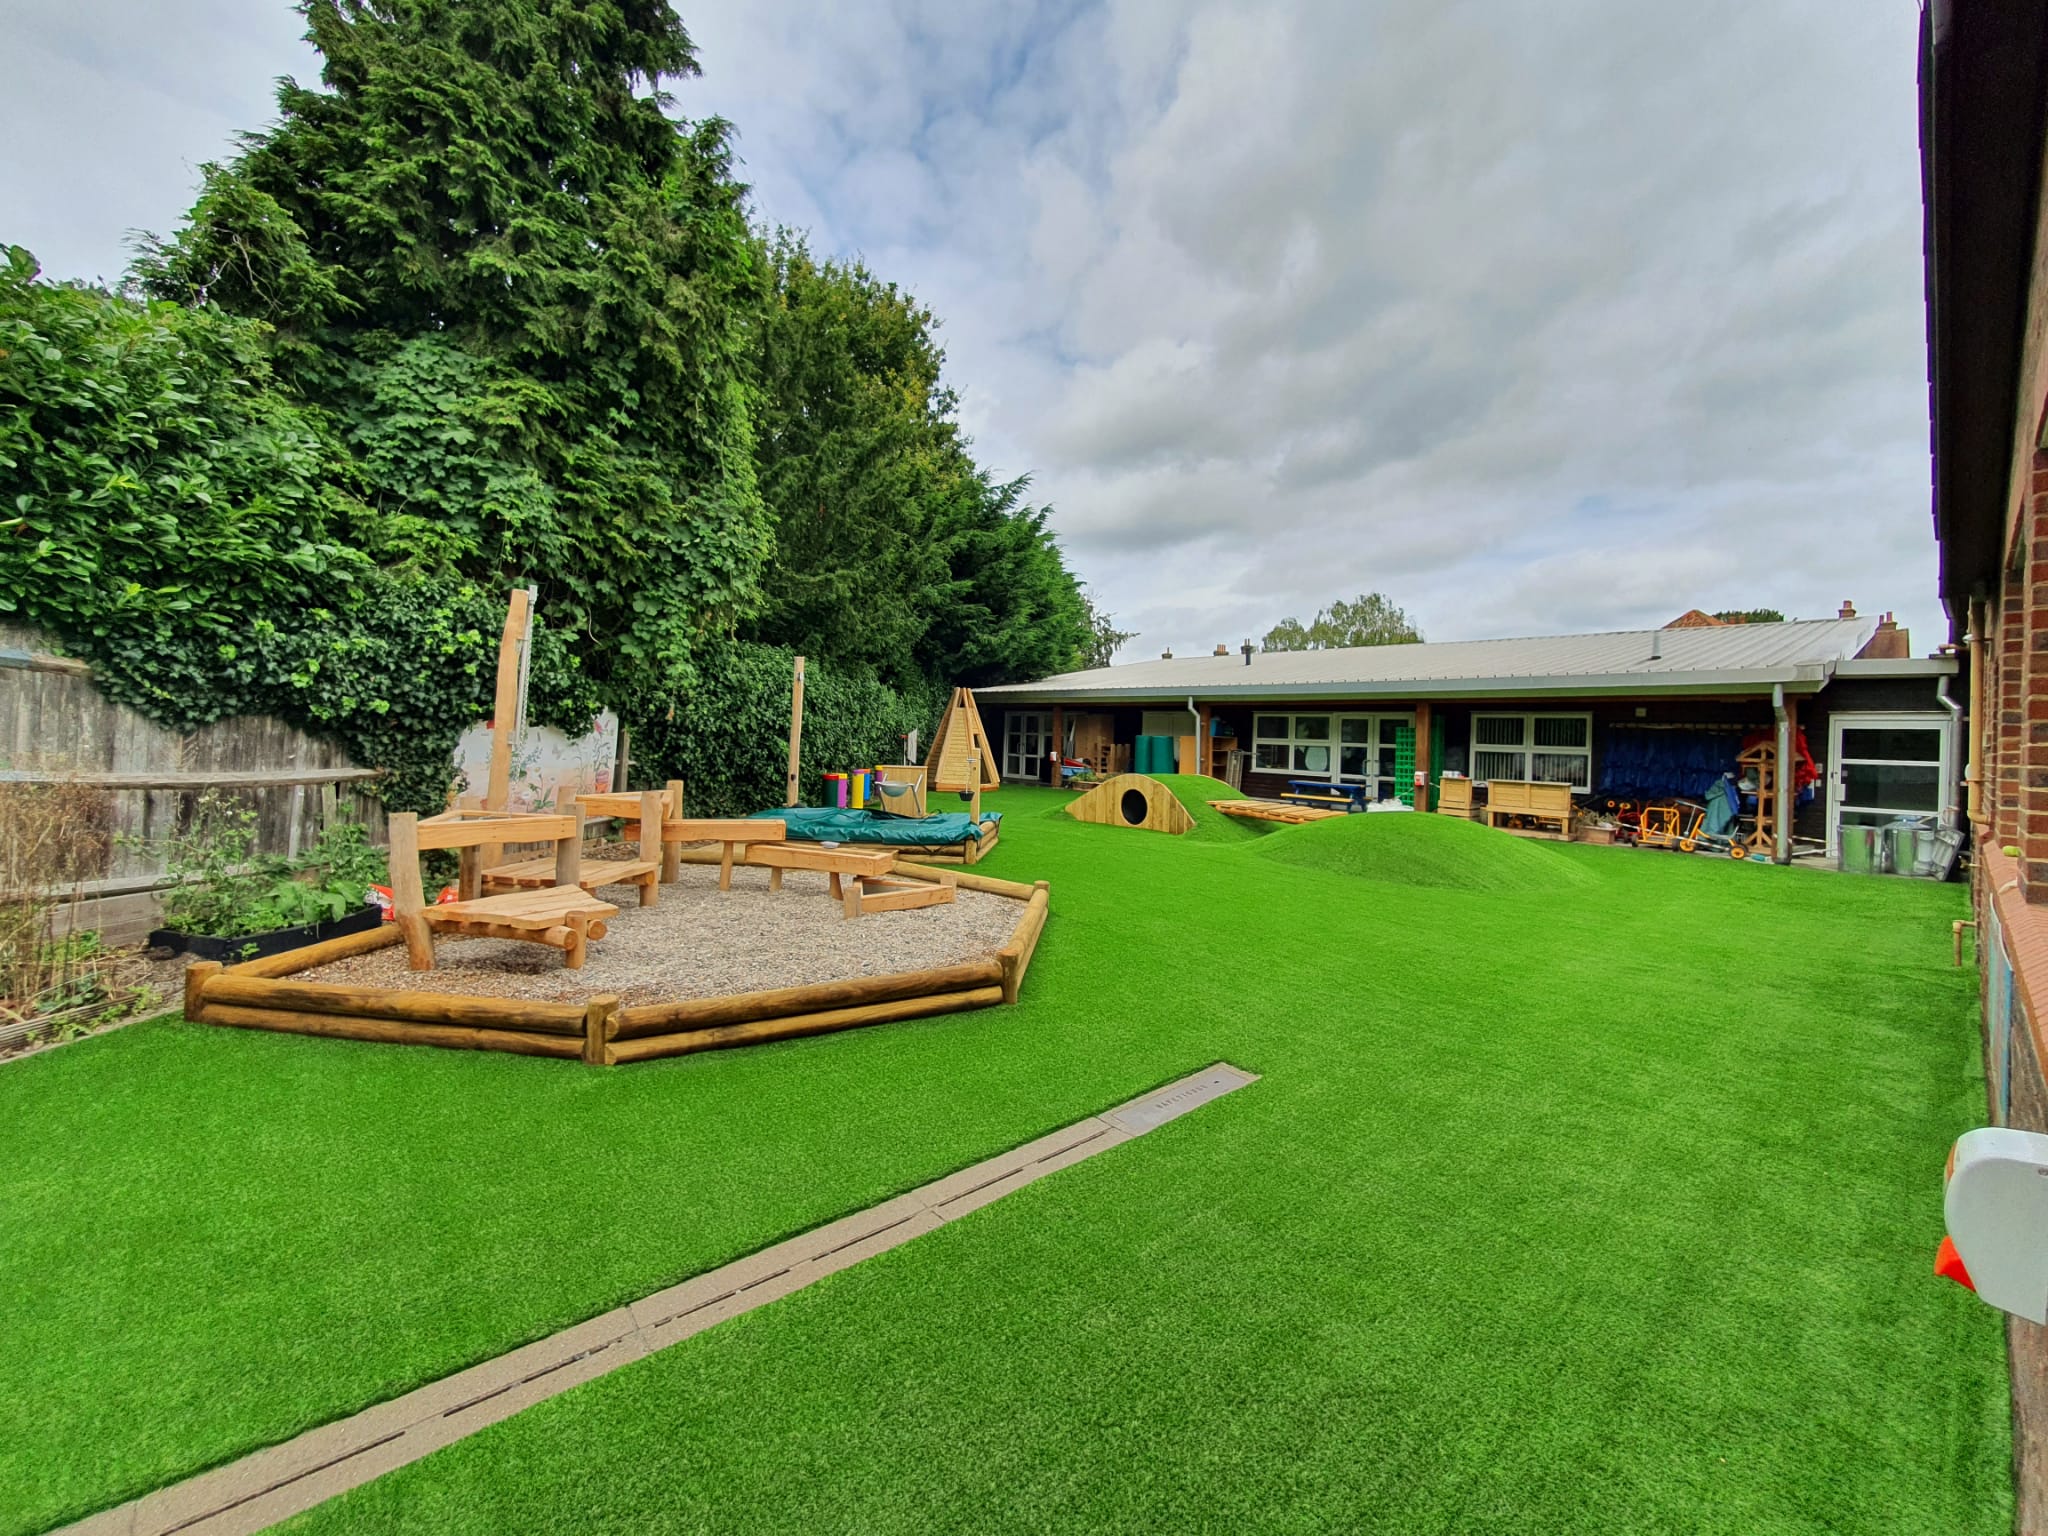 5 Reasons To Install Artificial Grass in Schools & Playgrounds